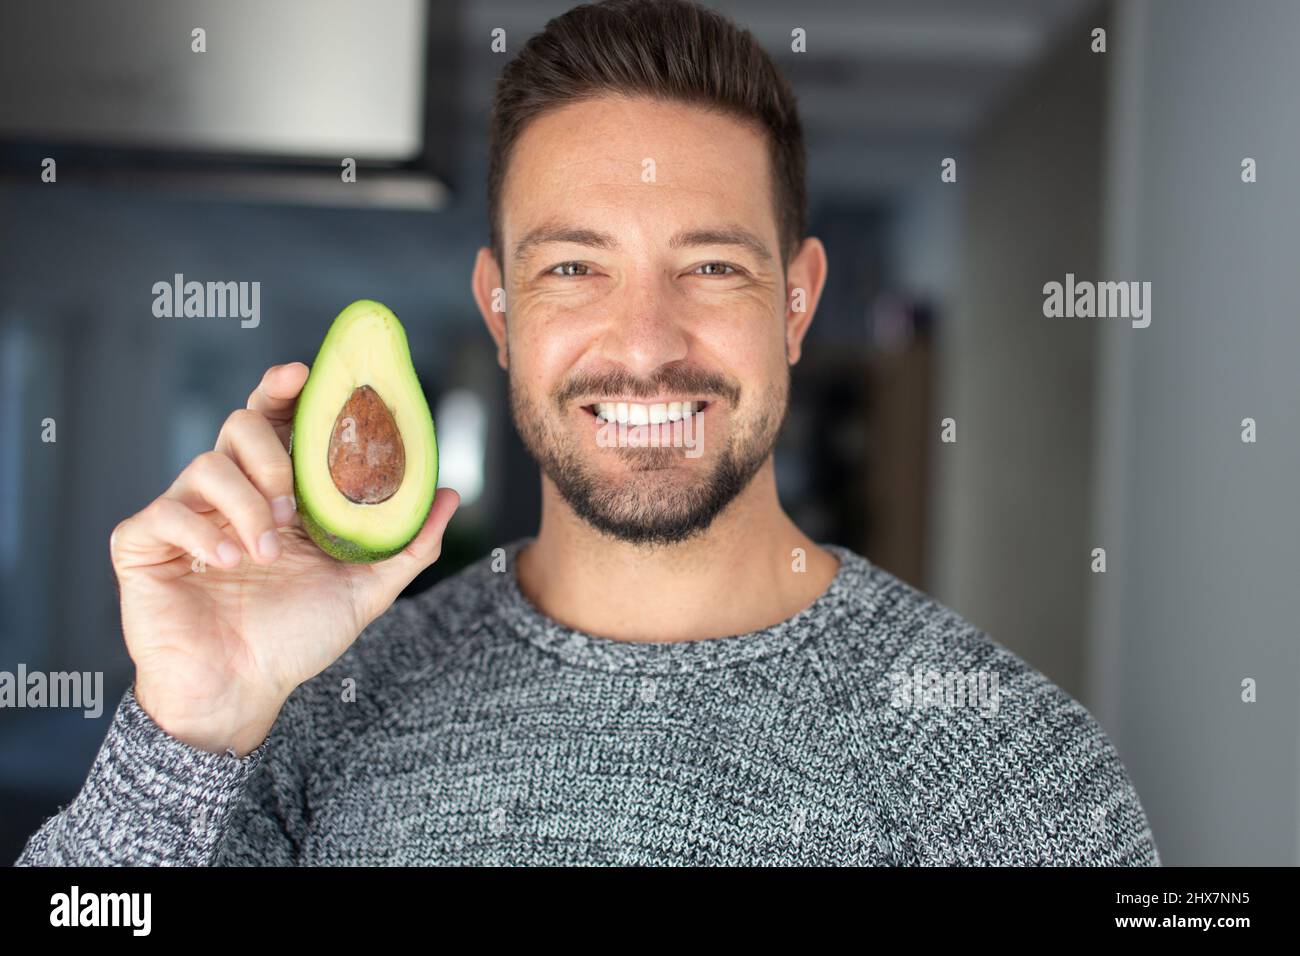 Young Caucasian 30s man holding halved avocado with toothy smile Stock Photo